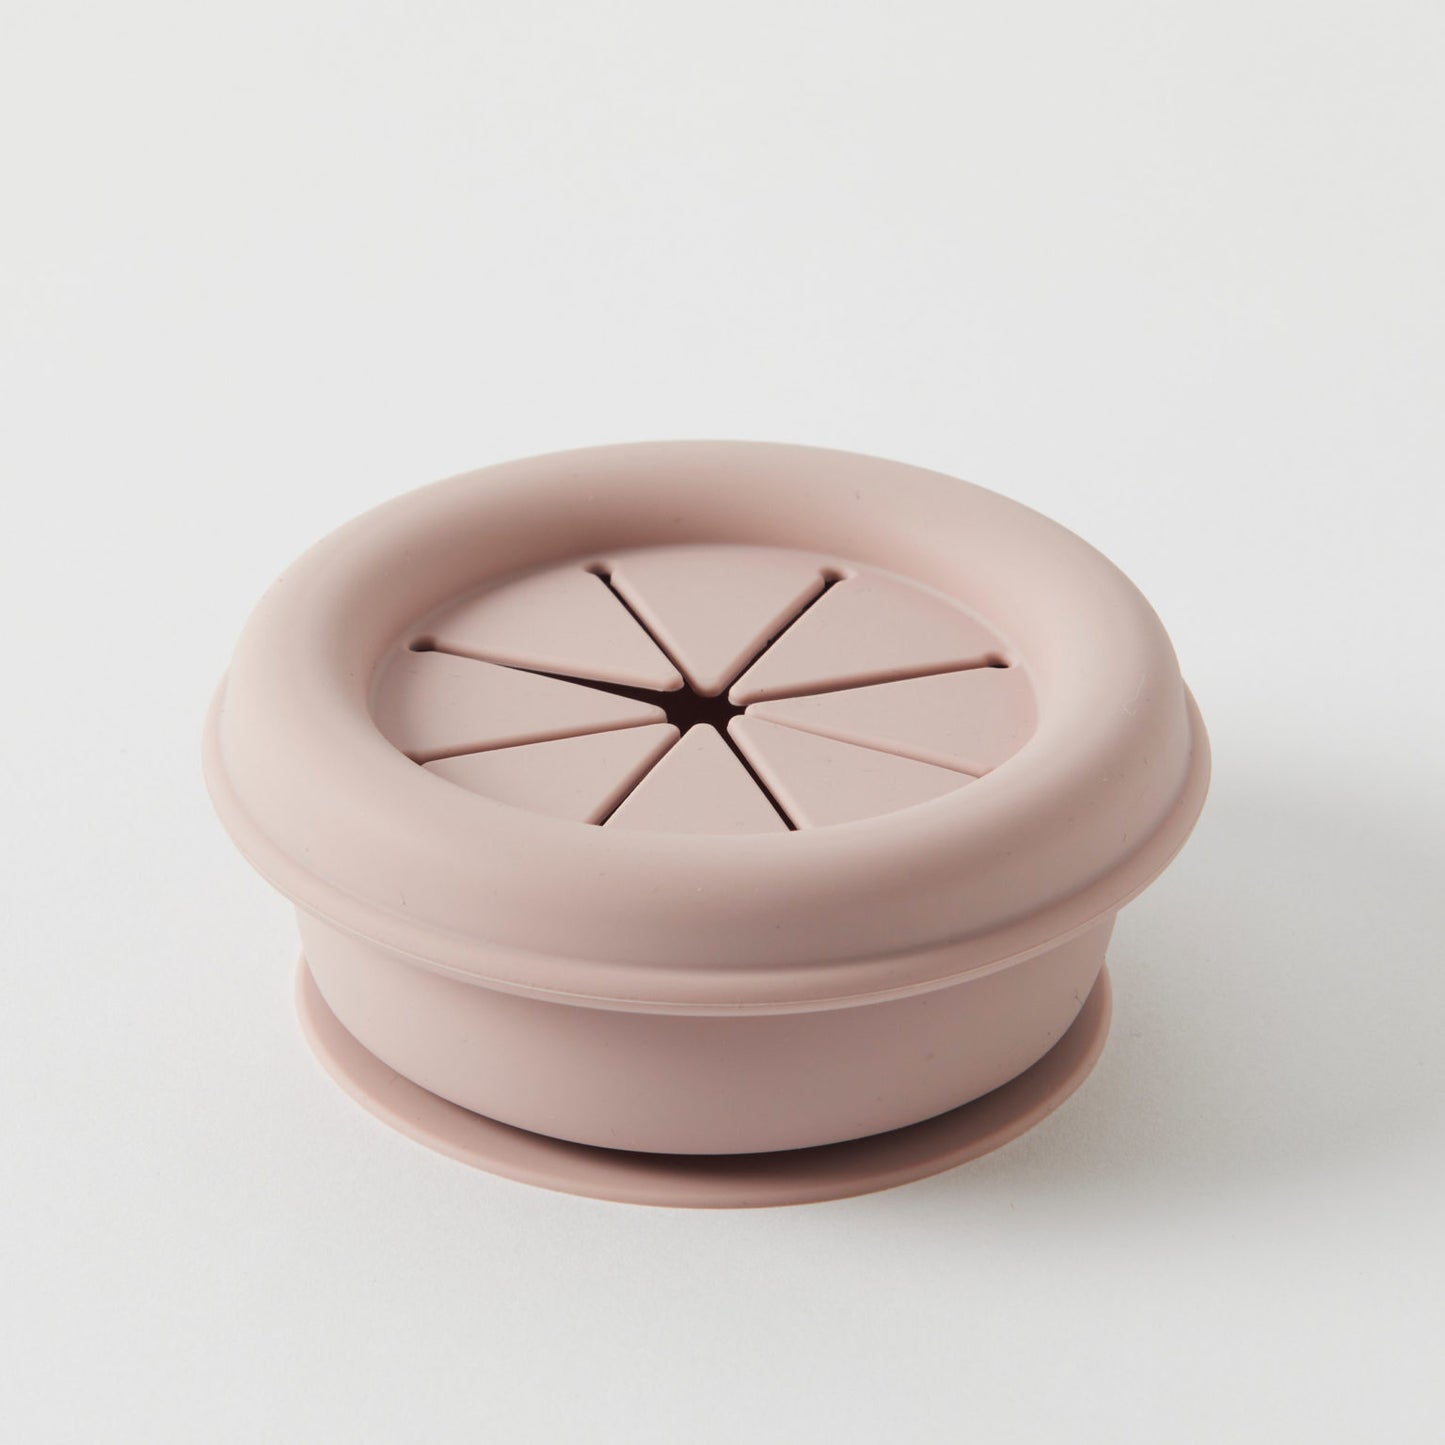 Henny Collapsible Snack Cup - Musk Pink